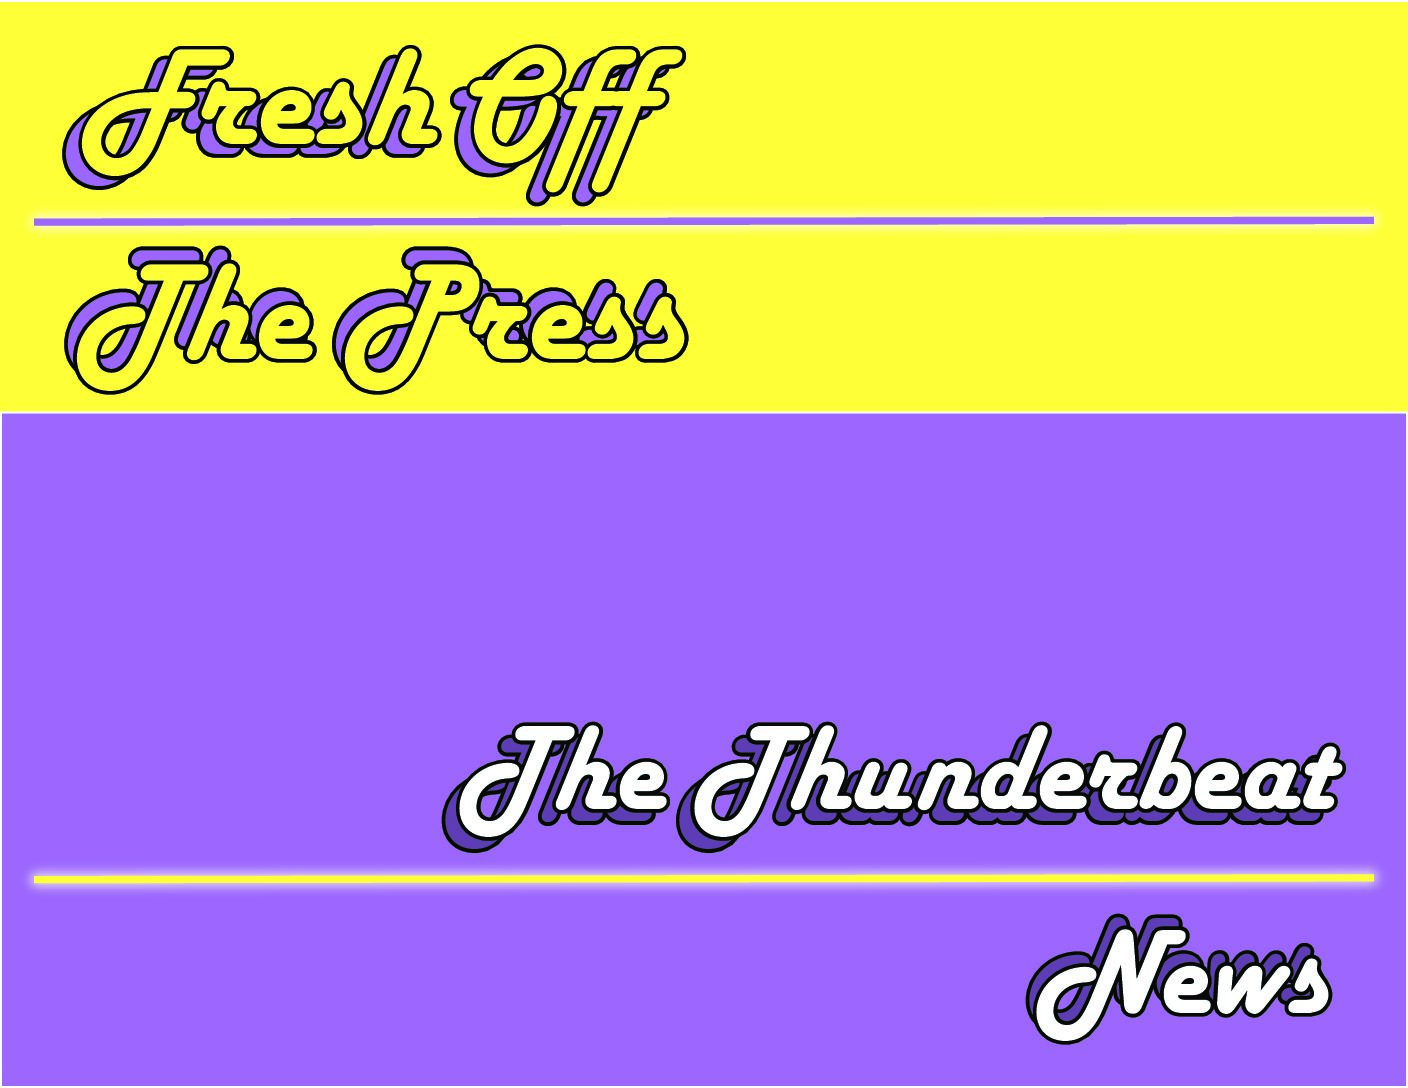 The weekly news presented by The Thunderbeat with Shane Daughtrey